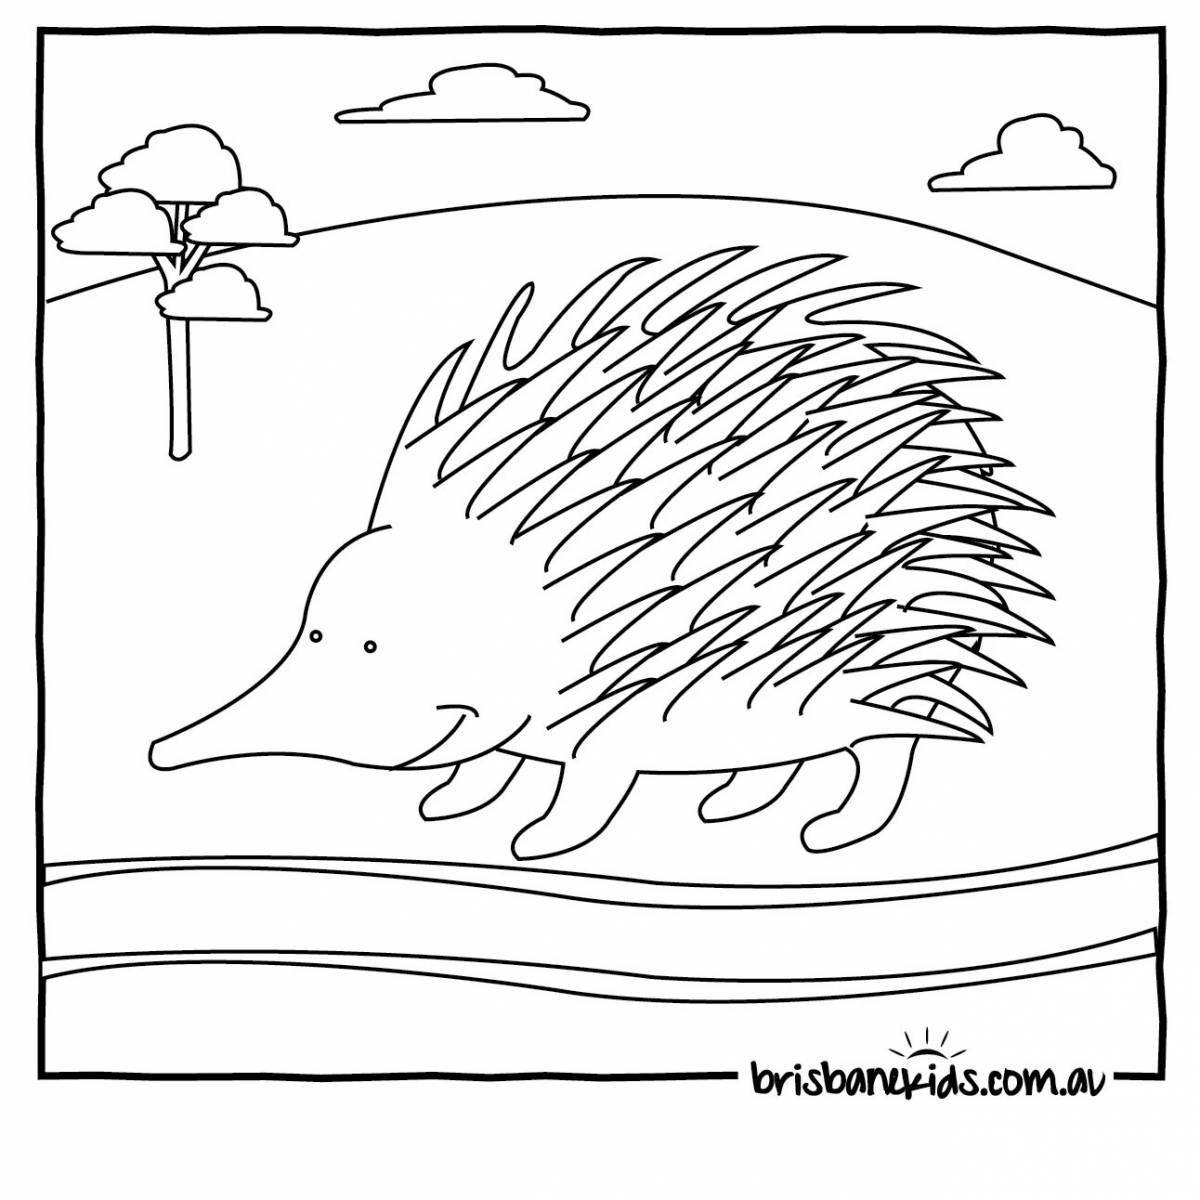 Coloring page charming echidna